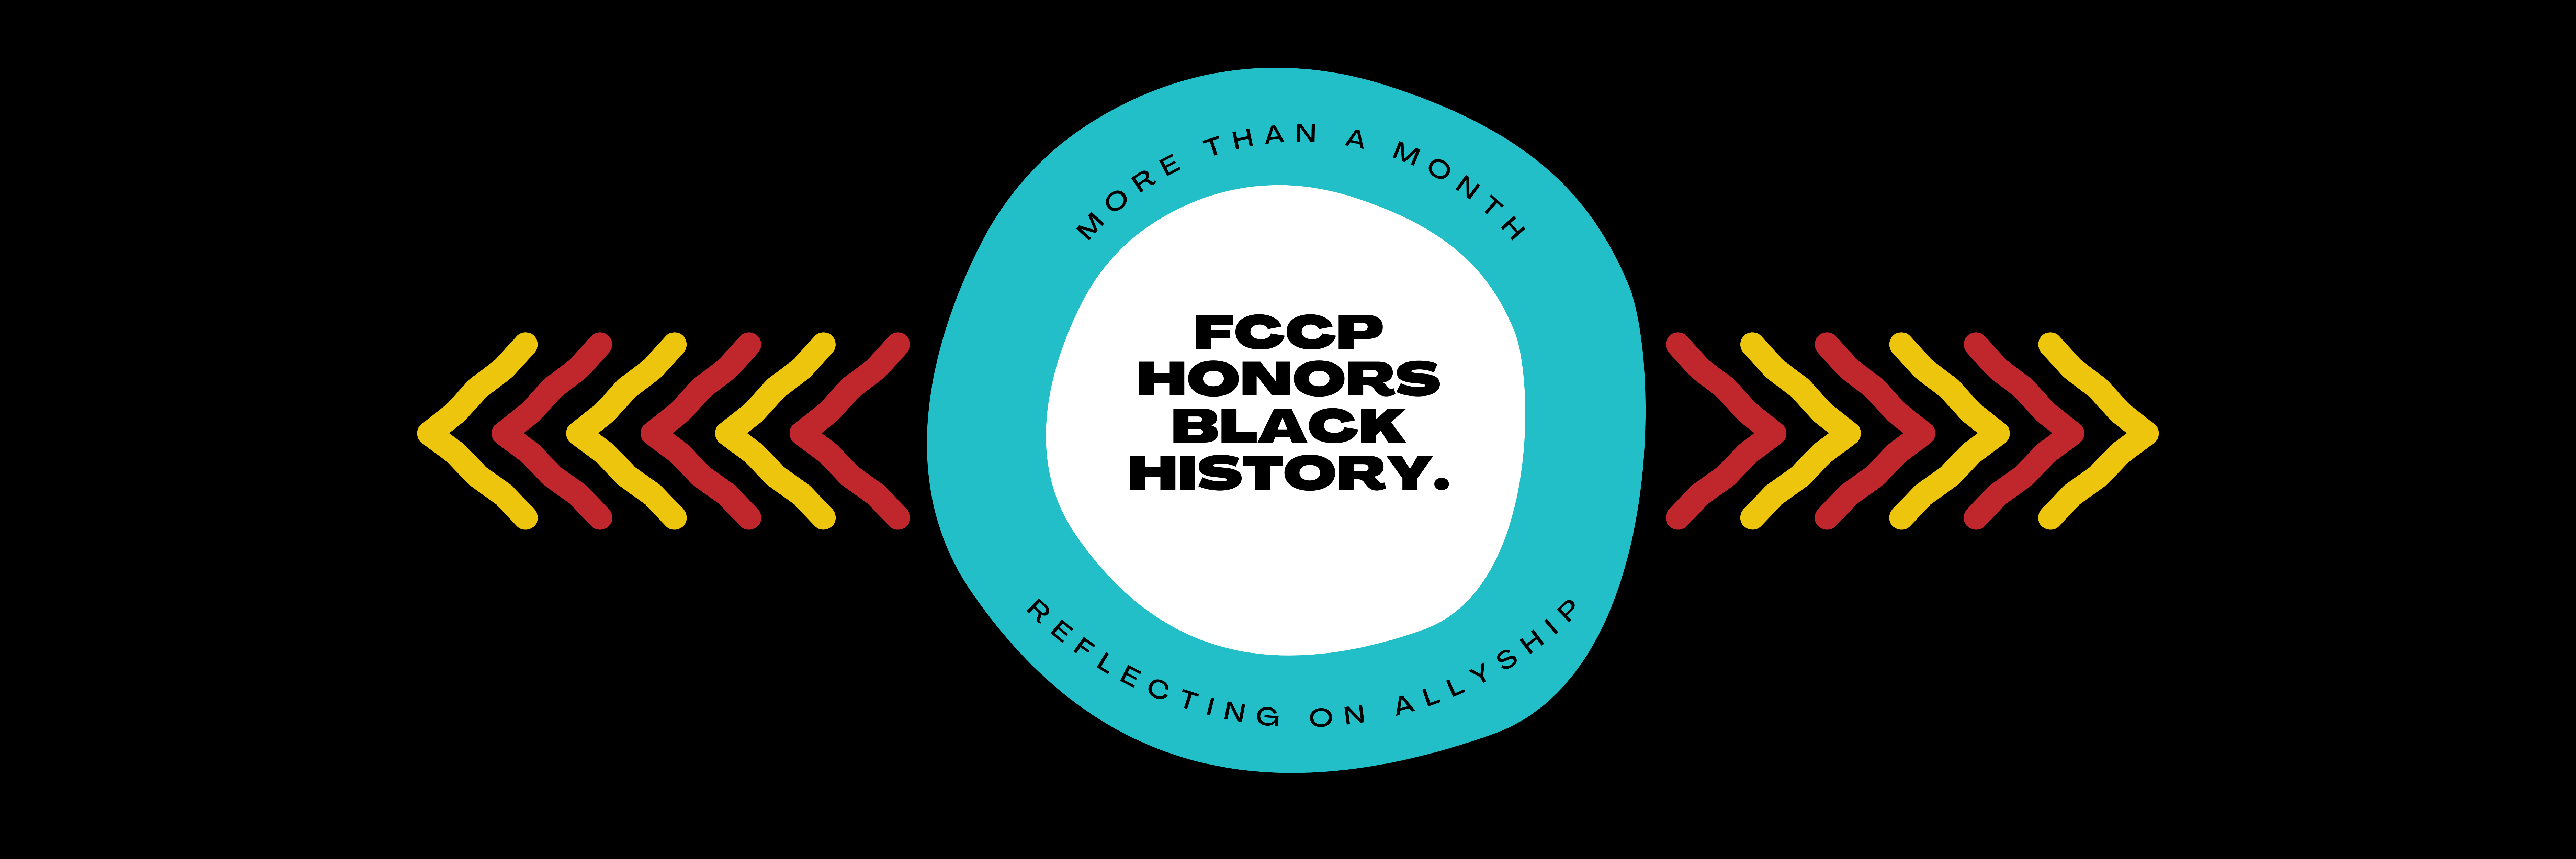 Black background with two irregularly shaped circular graphics in the center: the inner most circle is filled white with black text in the center that reads FCCP HONORS BLACK HISTORY. The outer circle is filled FCCP blue and has black text lining the top and bottom curves of the circle that respectively reads MORE THAN A MONTH at the top and REFLECTING ON ALLYSHIP on the bottom. To the left and right of the centered circular graphic are repeating arrow heads pointing outwards in alternating FCCP red and yellow colors.